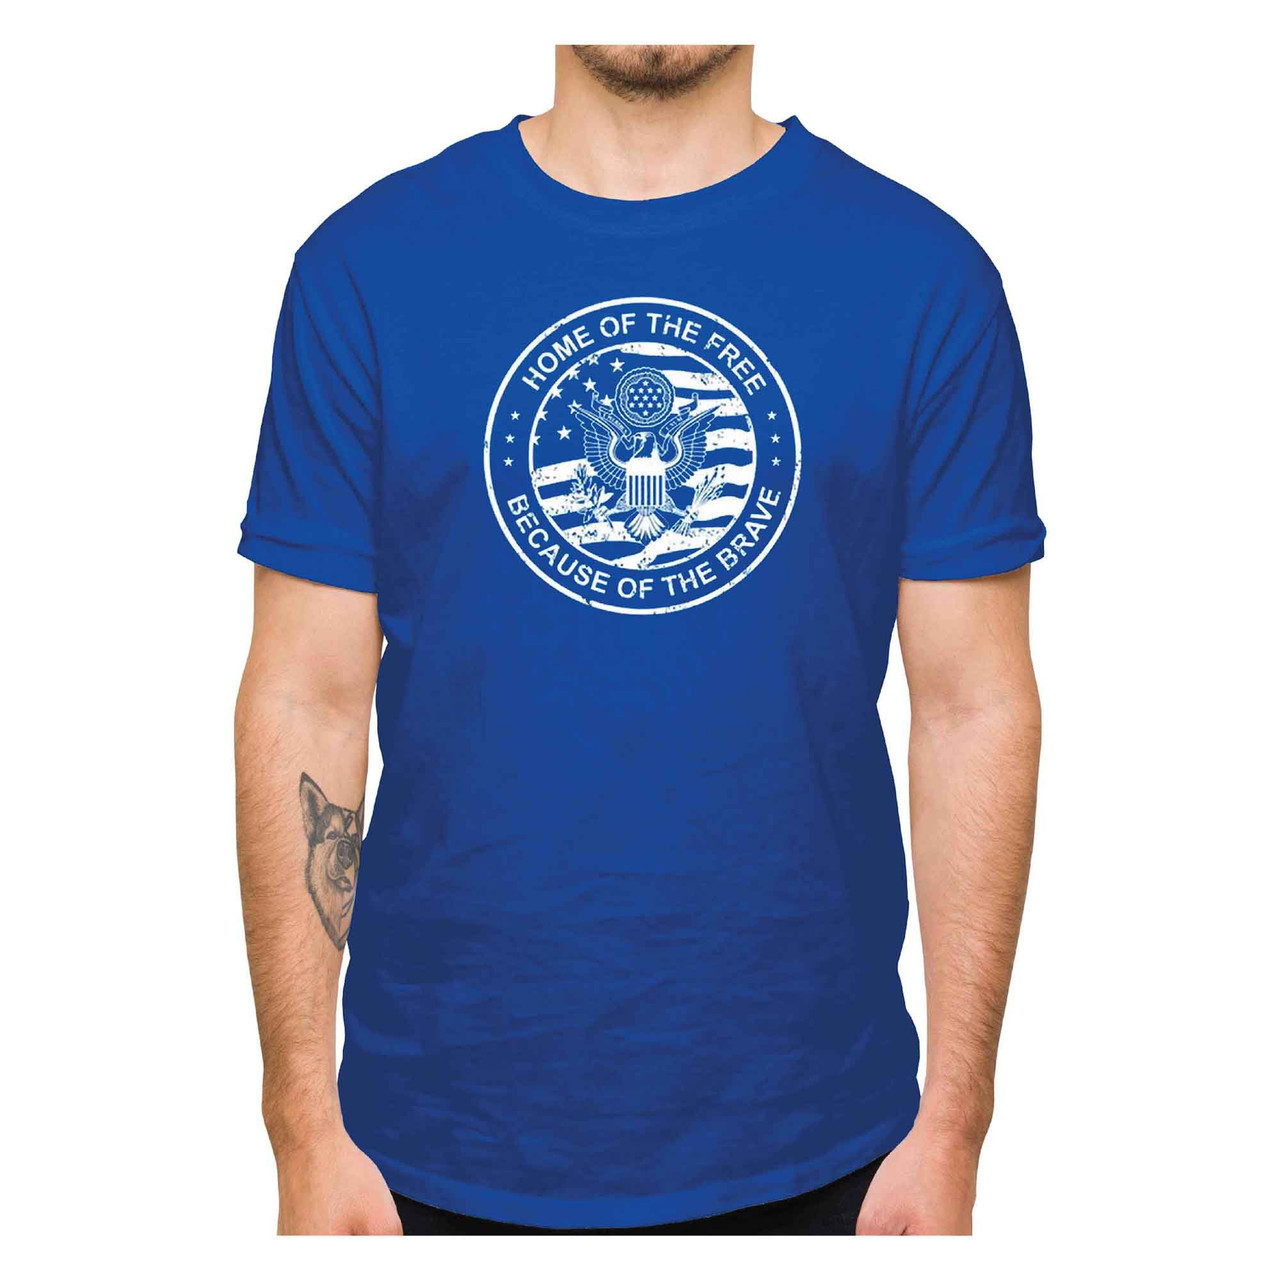 US Veteran T-Shirt with Home of the Free Because of the Brave Text: royal blue t shirt with white text - front view